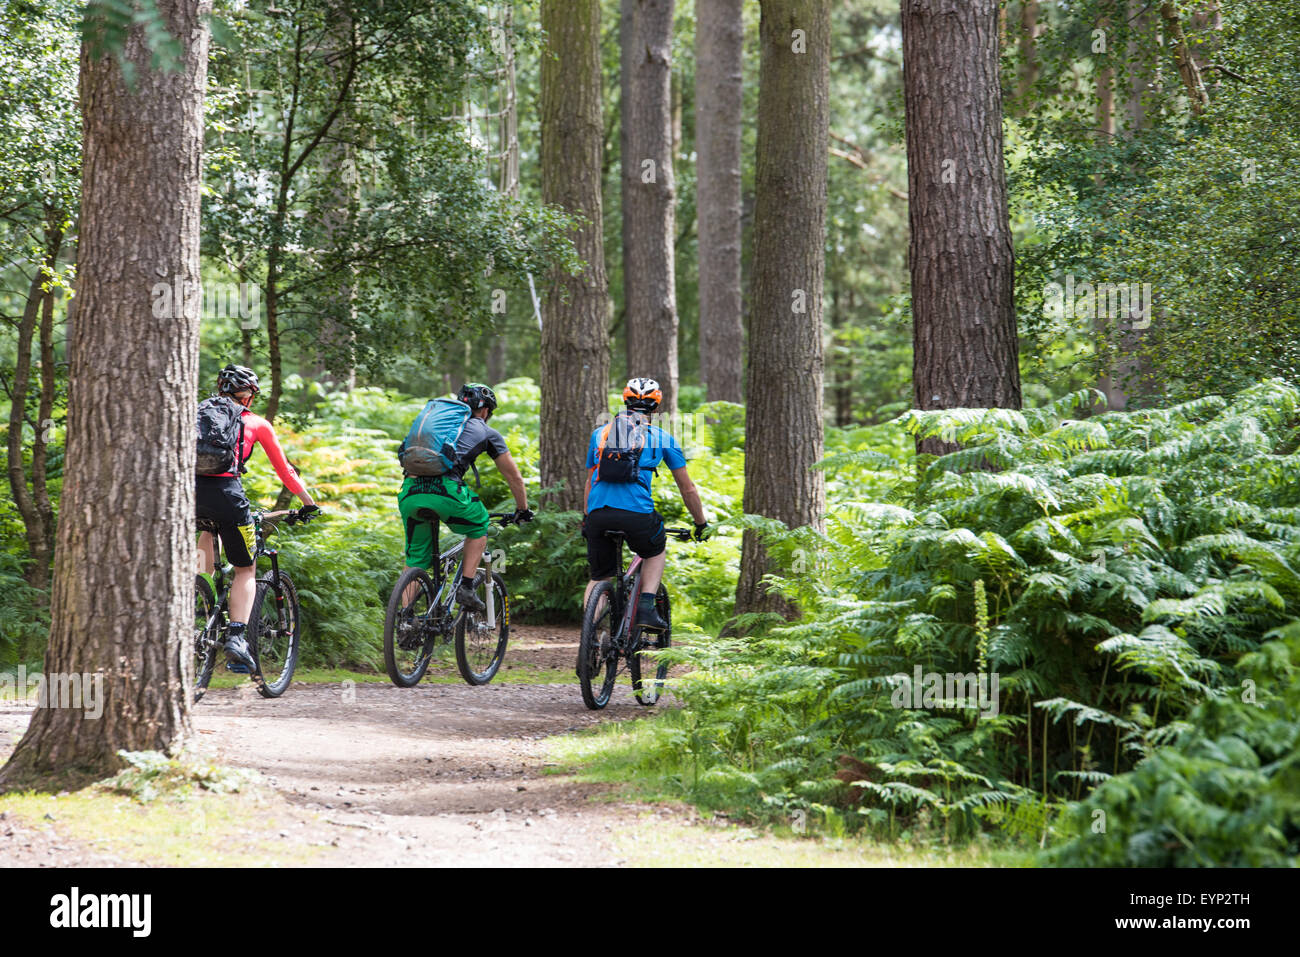 Cyclists on their mountain bikes on a trail at Go Ape activity centre cannock chase Staffordshire West Midlands uk Stock Photo